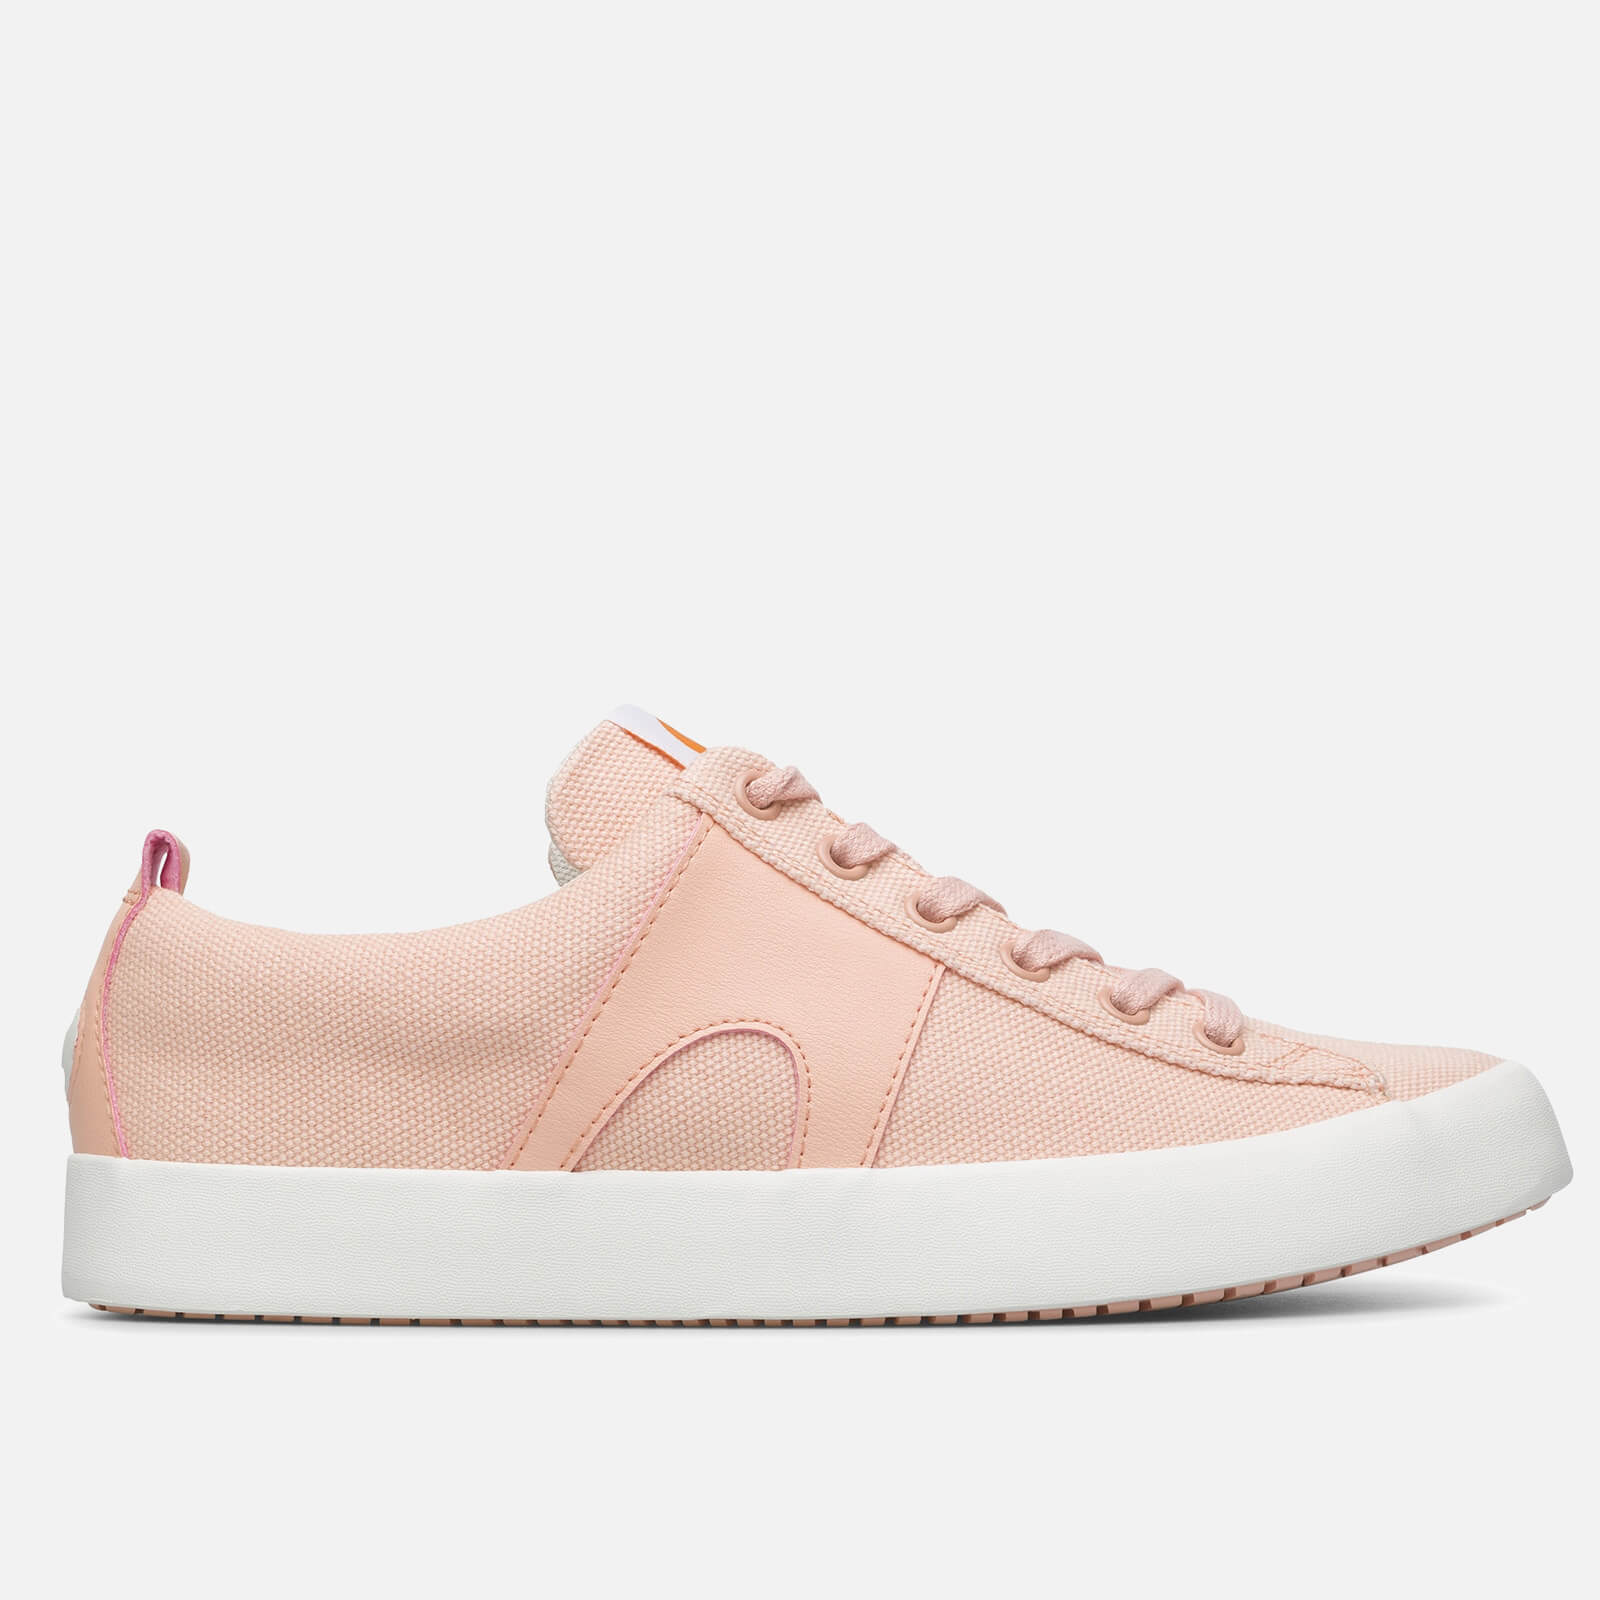 Camper Women's Canvas Low Top Trainers - Light Pastel Pink - UK 3